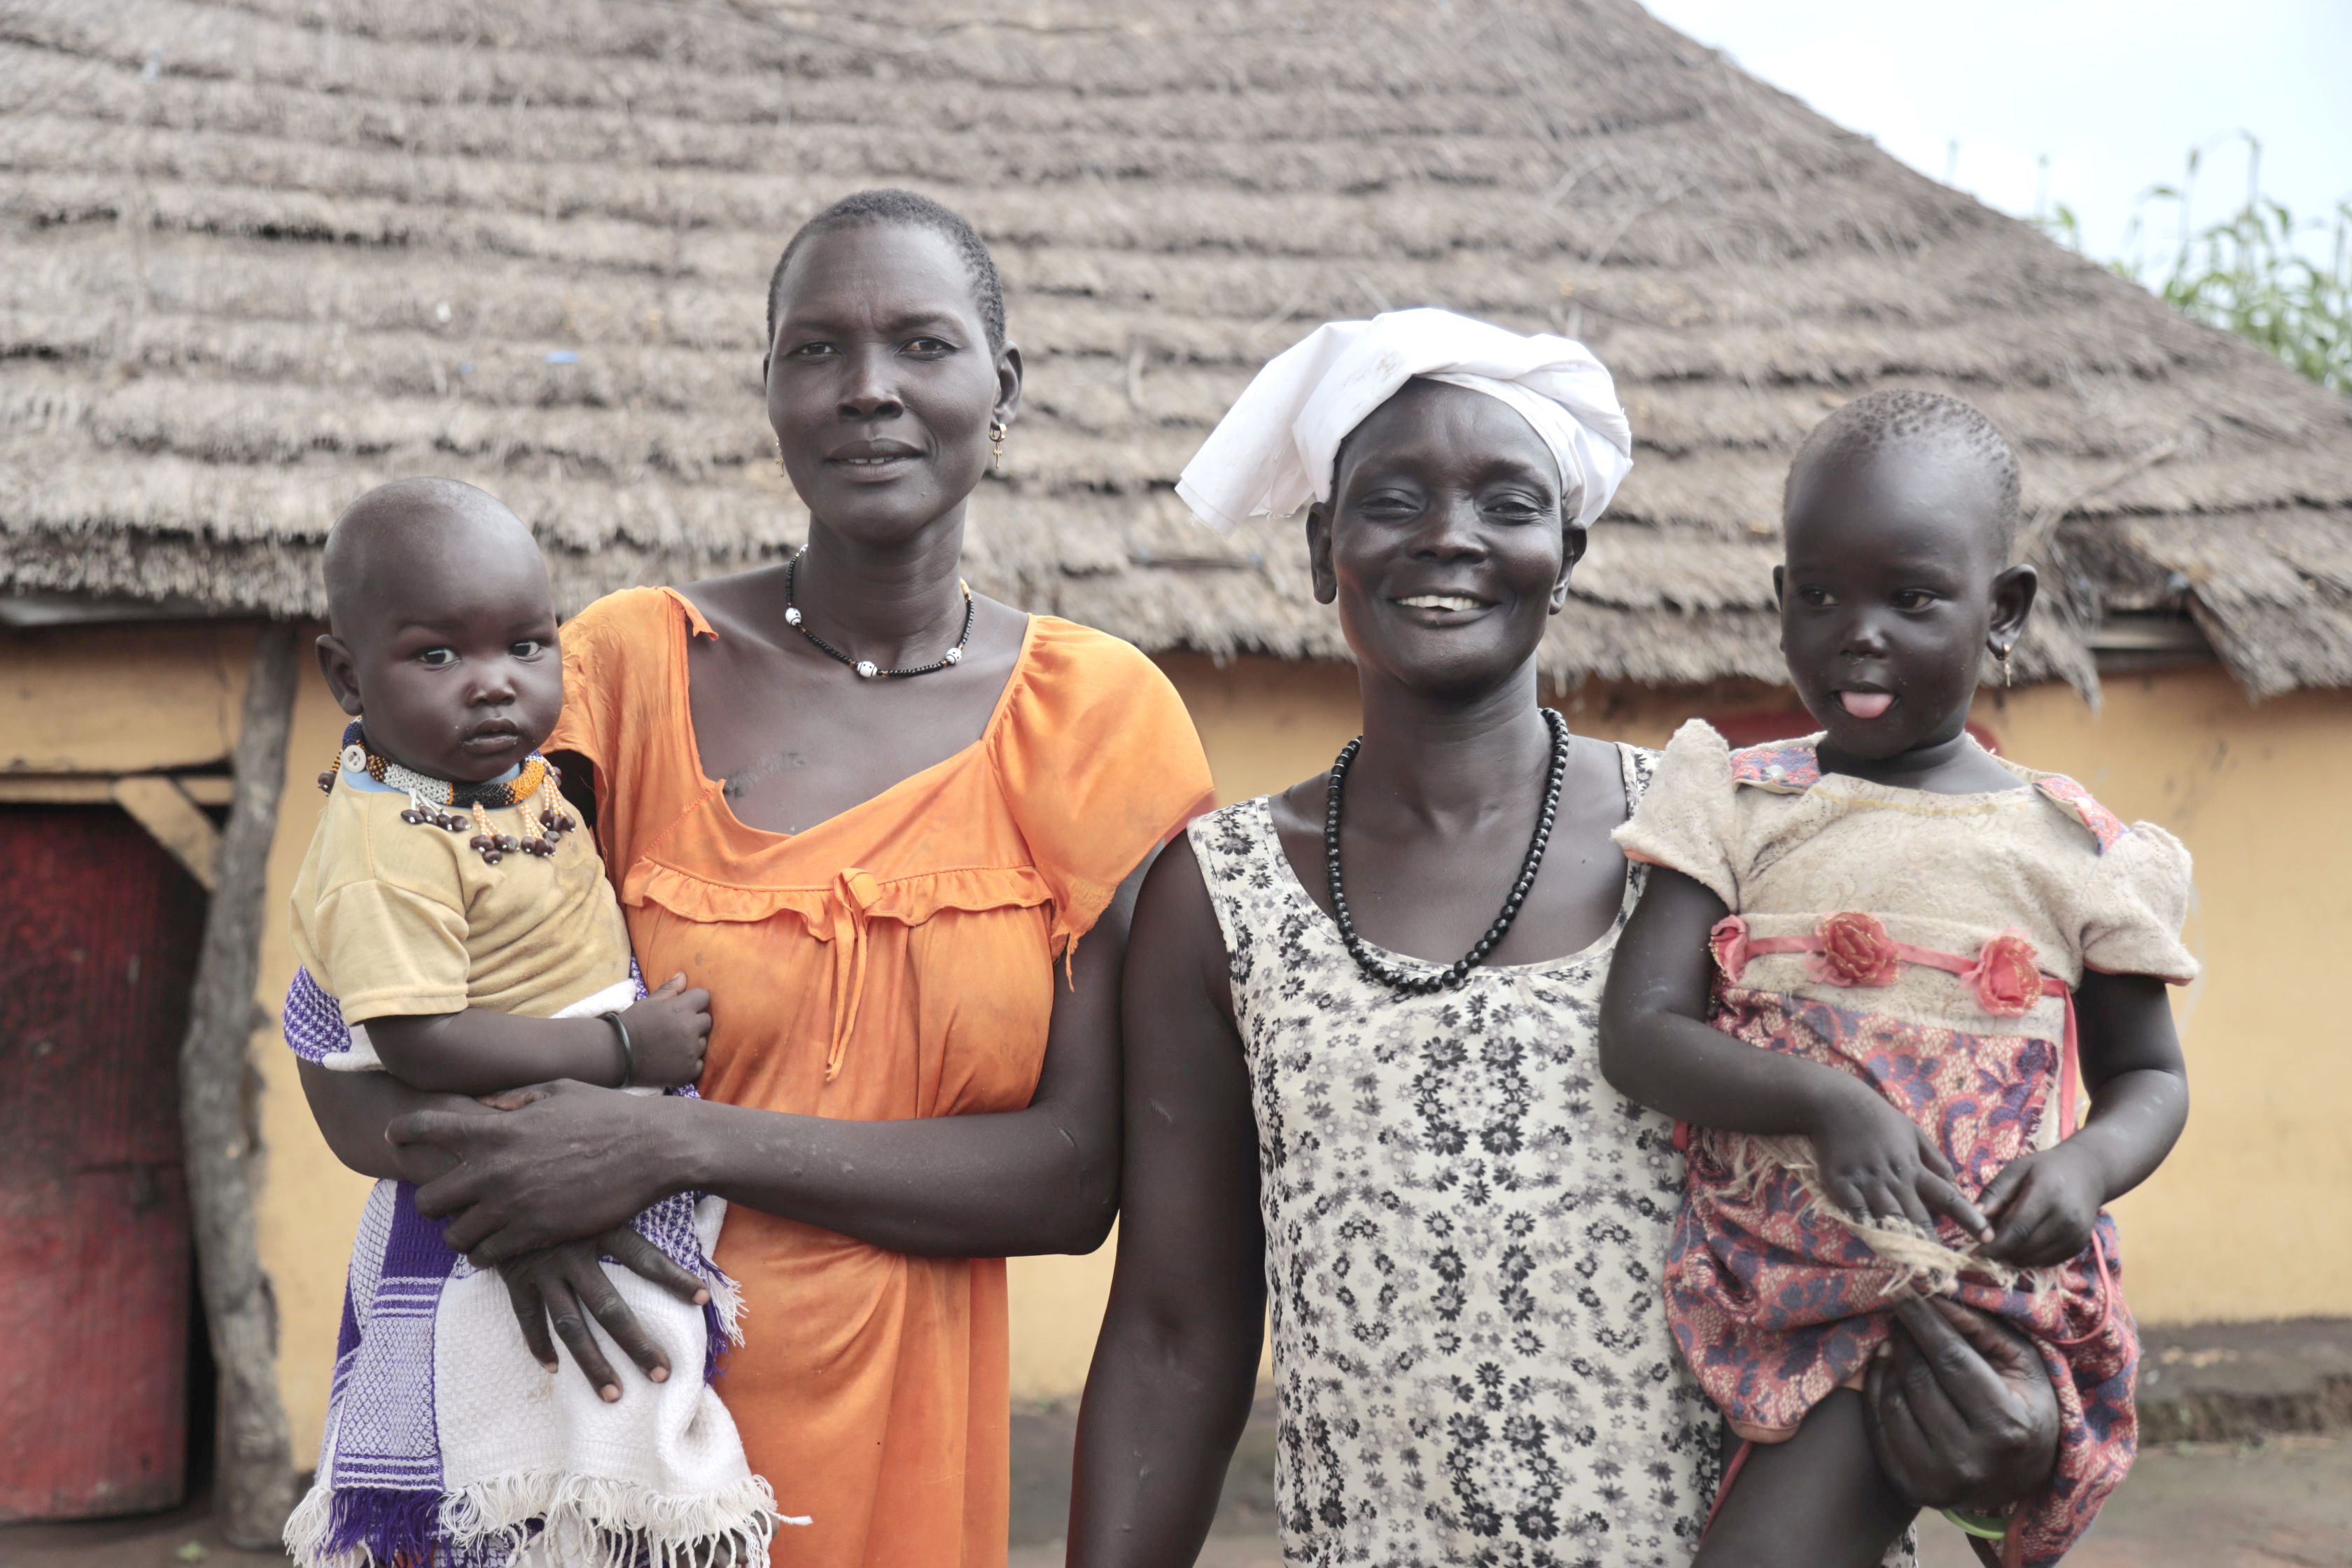 Two incredible women from South Sudan – Awut and Ajak